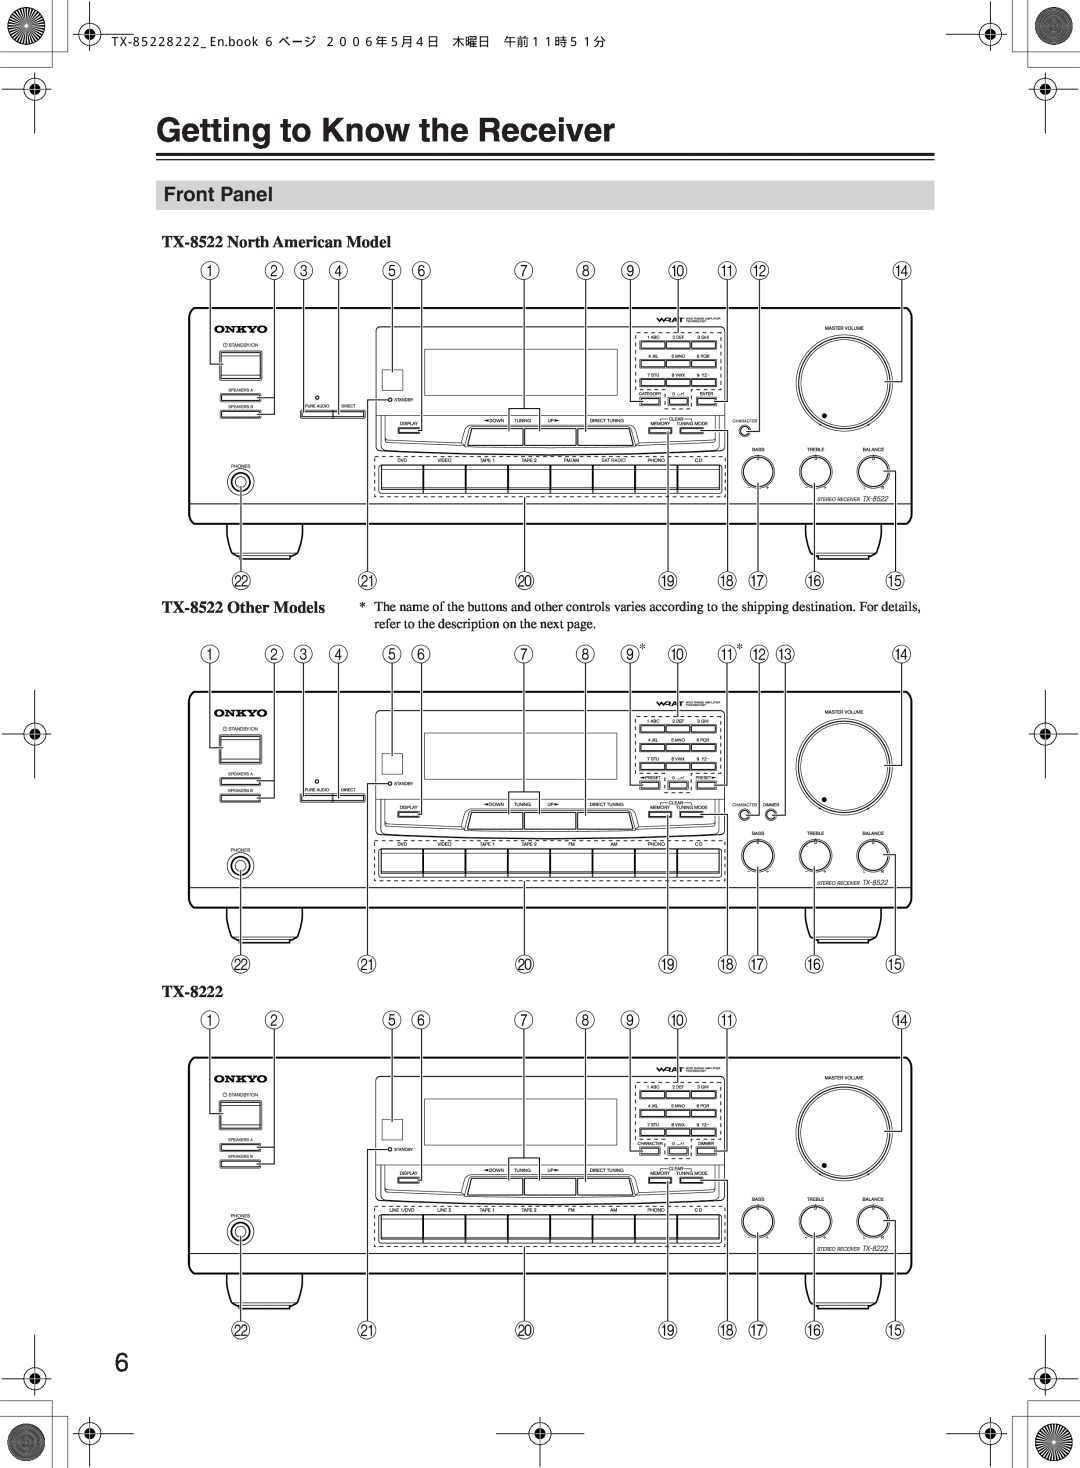 Onkyo TX-8222, TX-8522 instruction manual Getting to Know the Receiver, Front Panel 